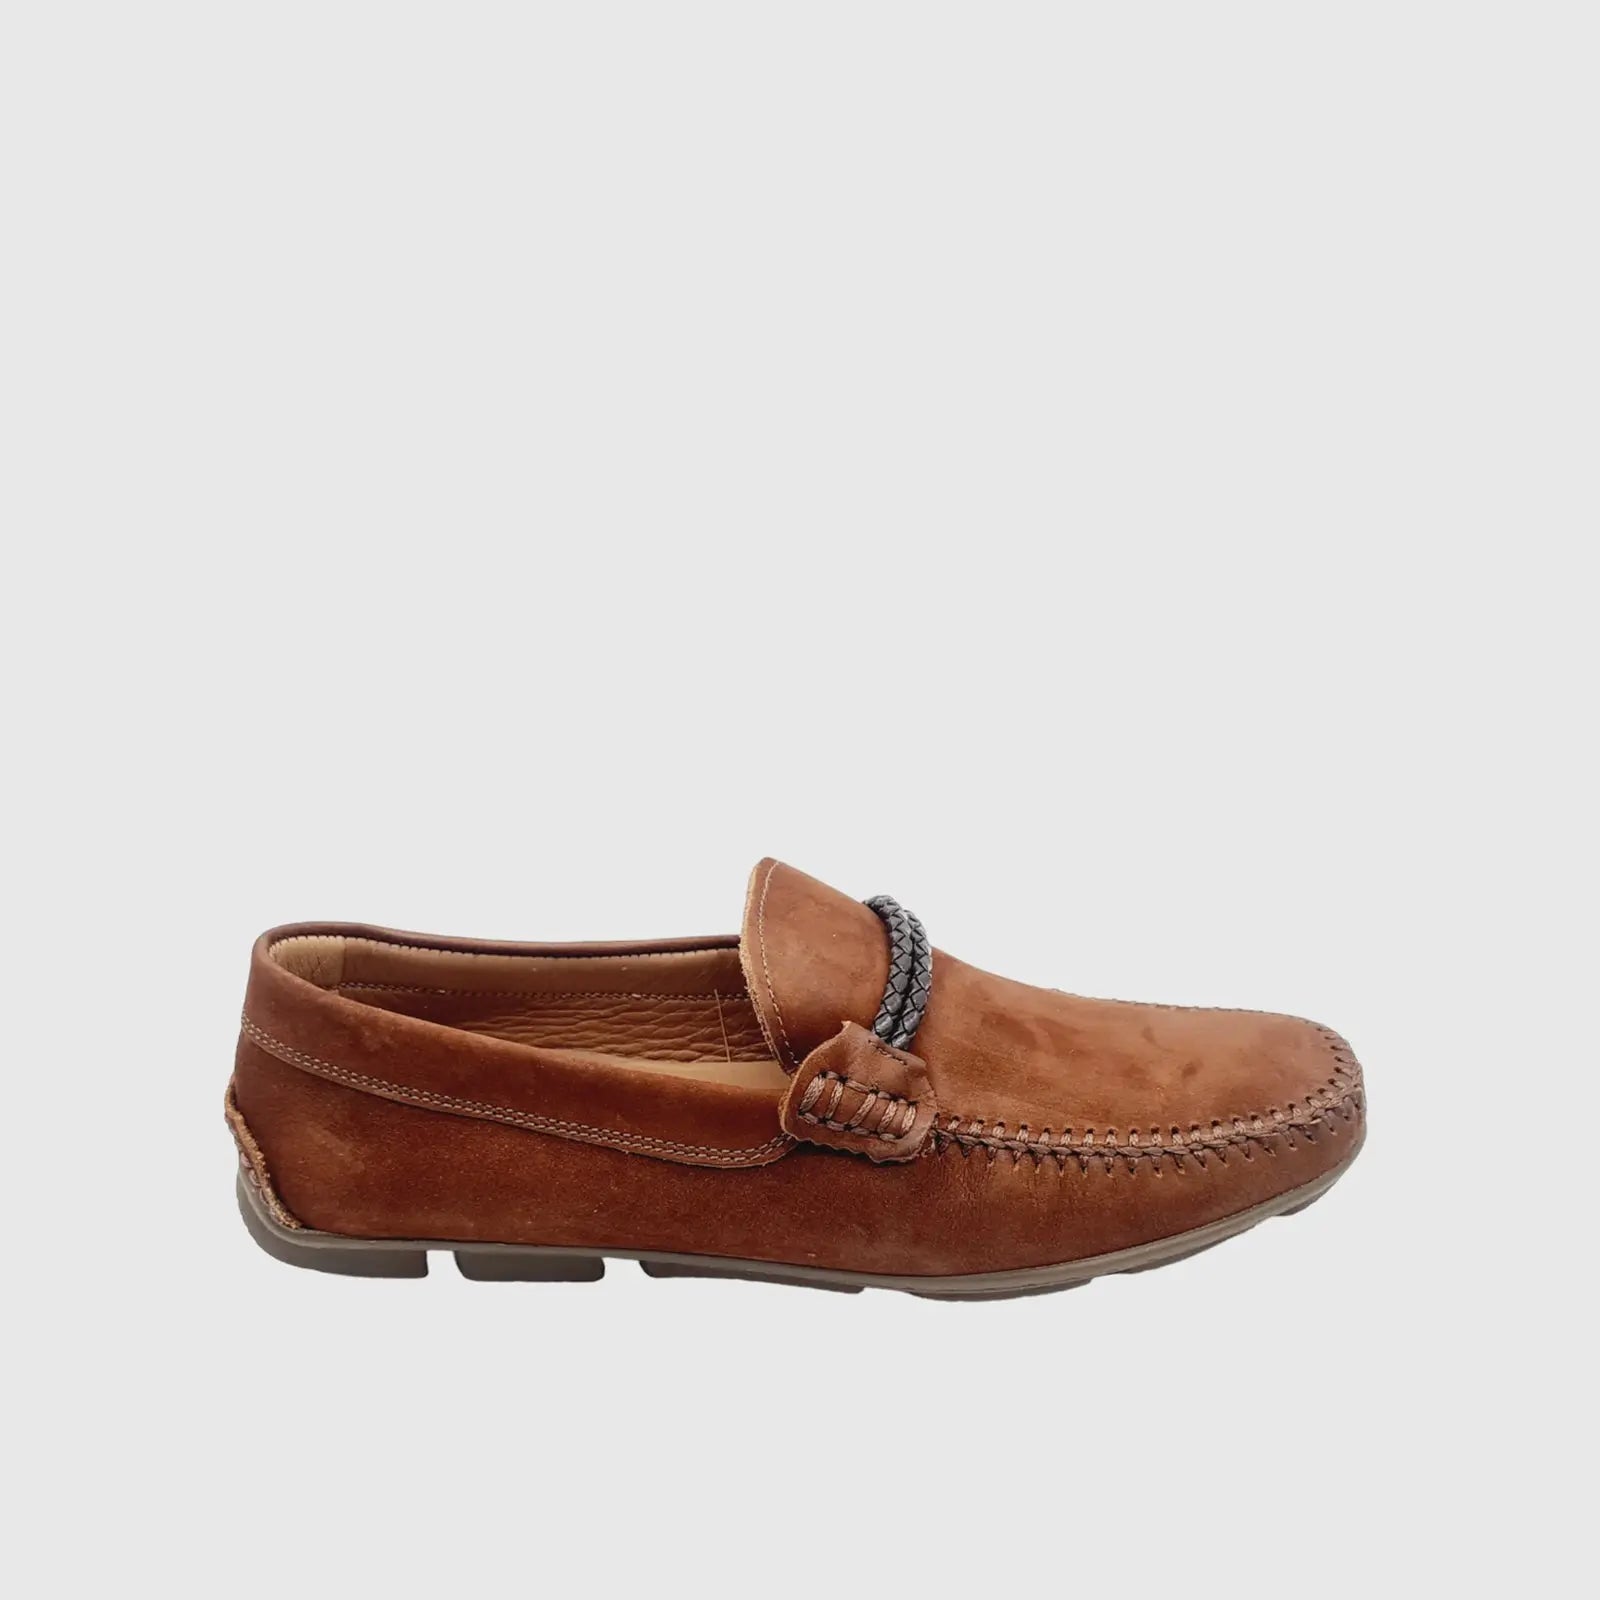 ANATOMIC 363621 BROWN Loafers | familyshoecentre